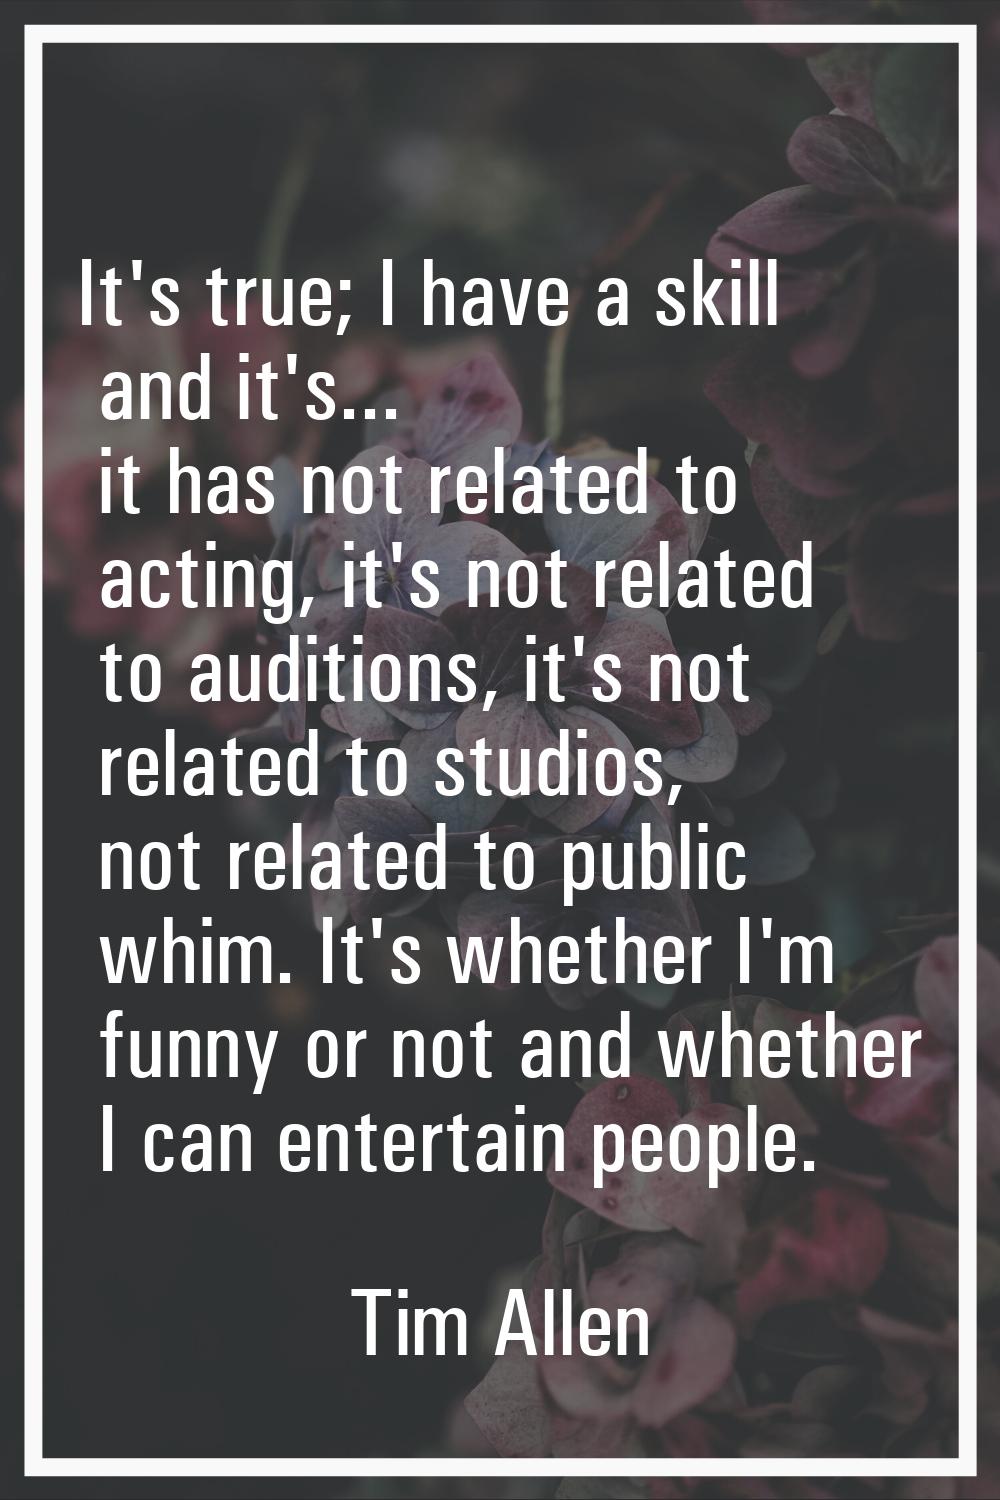 It's true; I have a skill and it's... it has not related to acting, it's not related to auditions, 